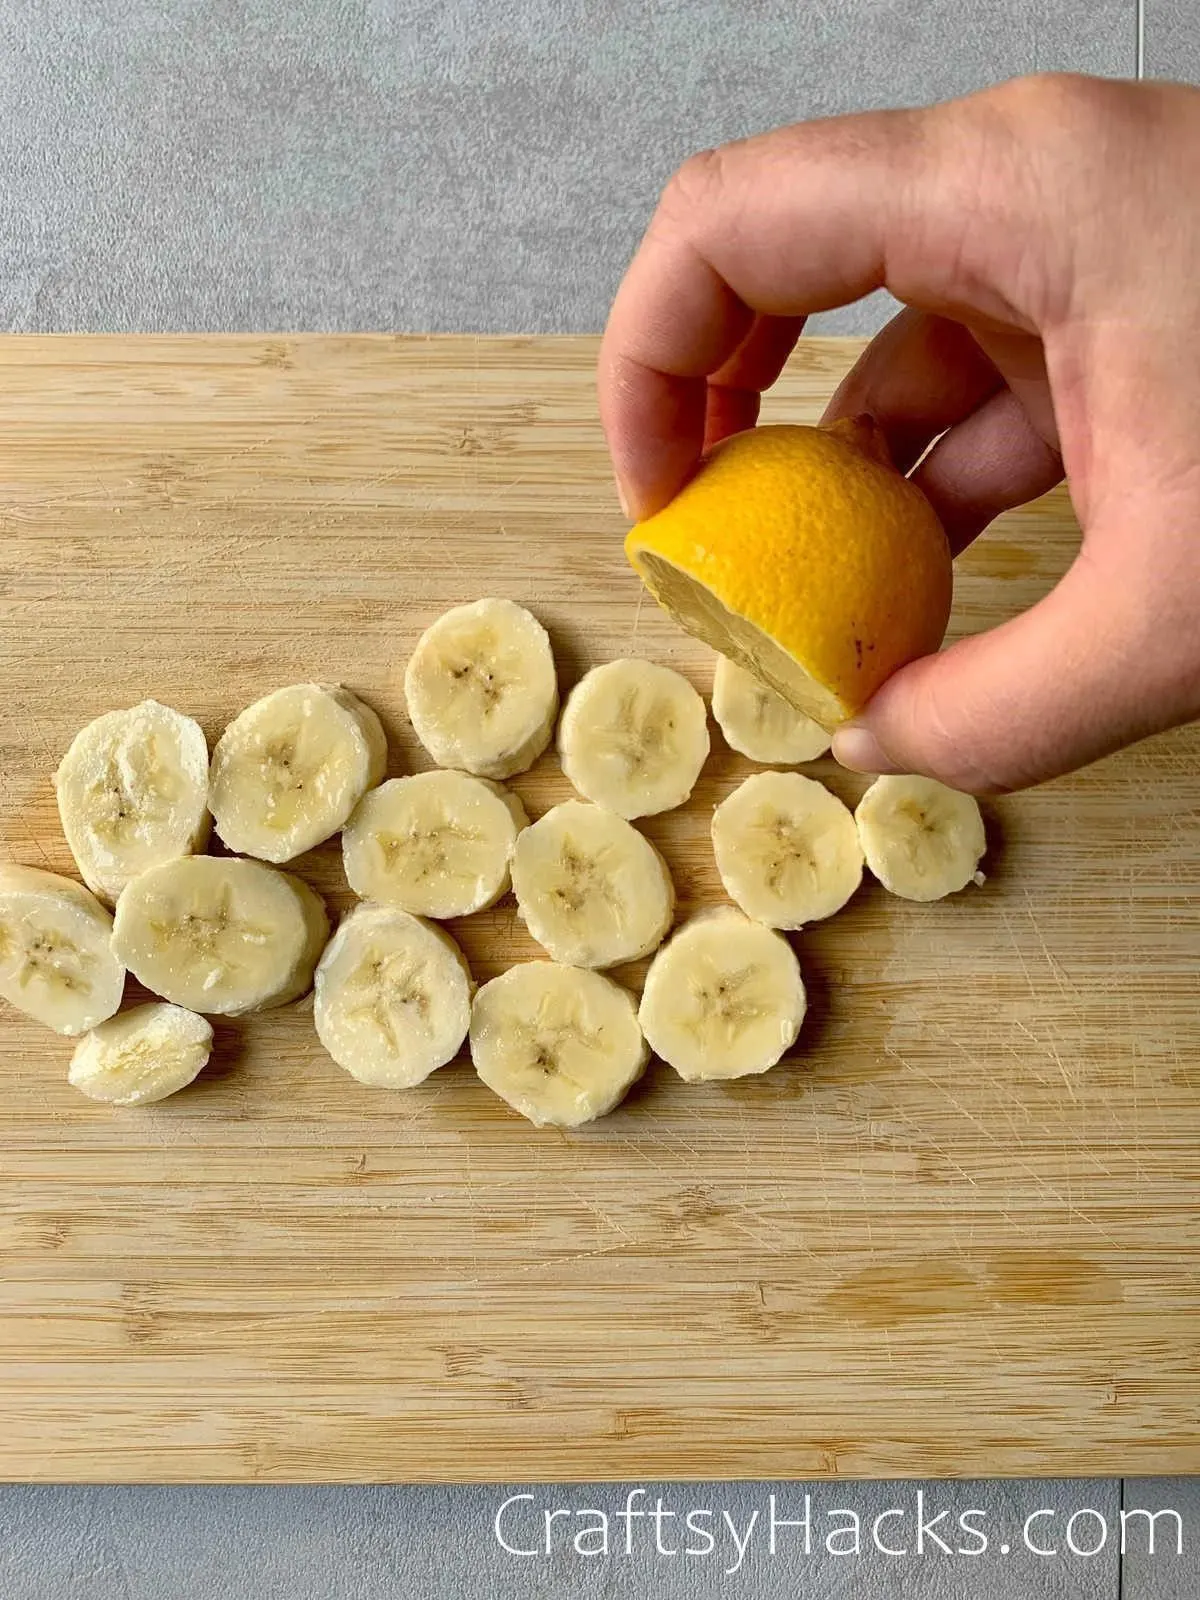 squeeze lemon to keep cut fruit from browning